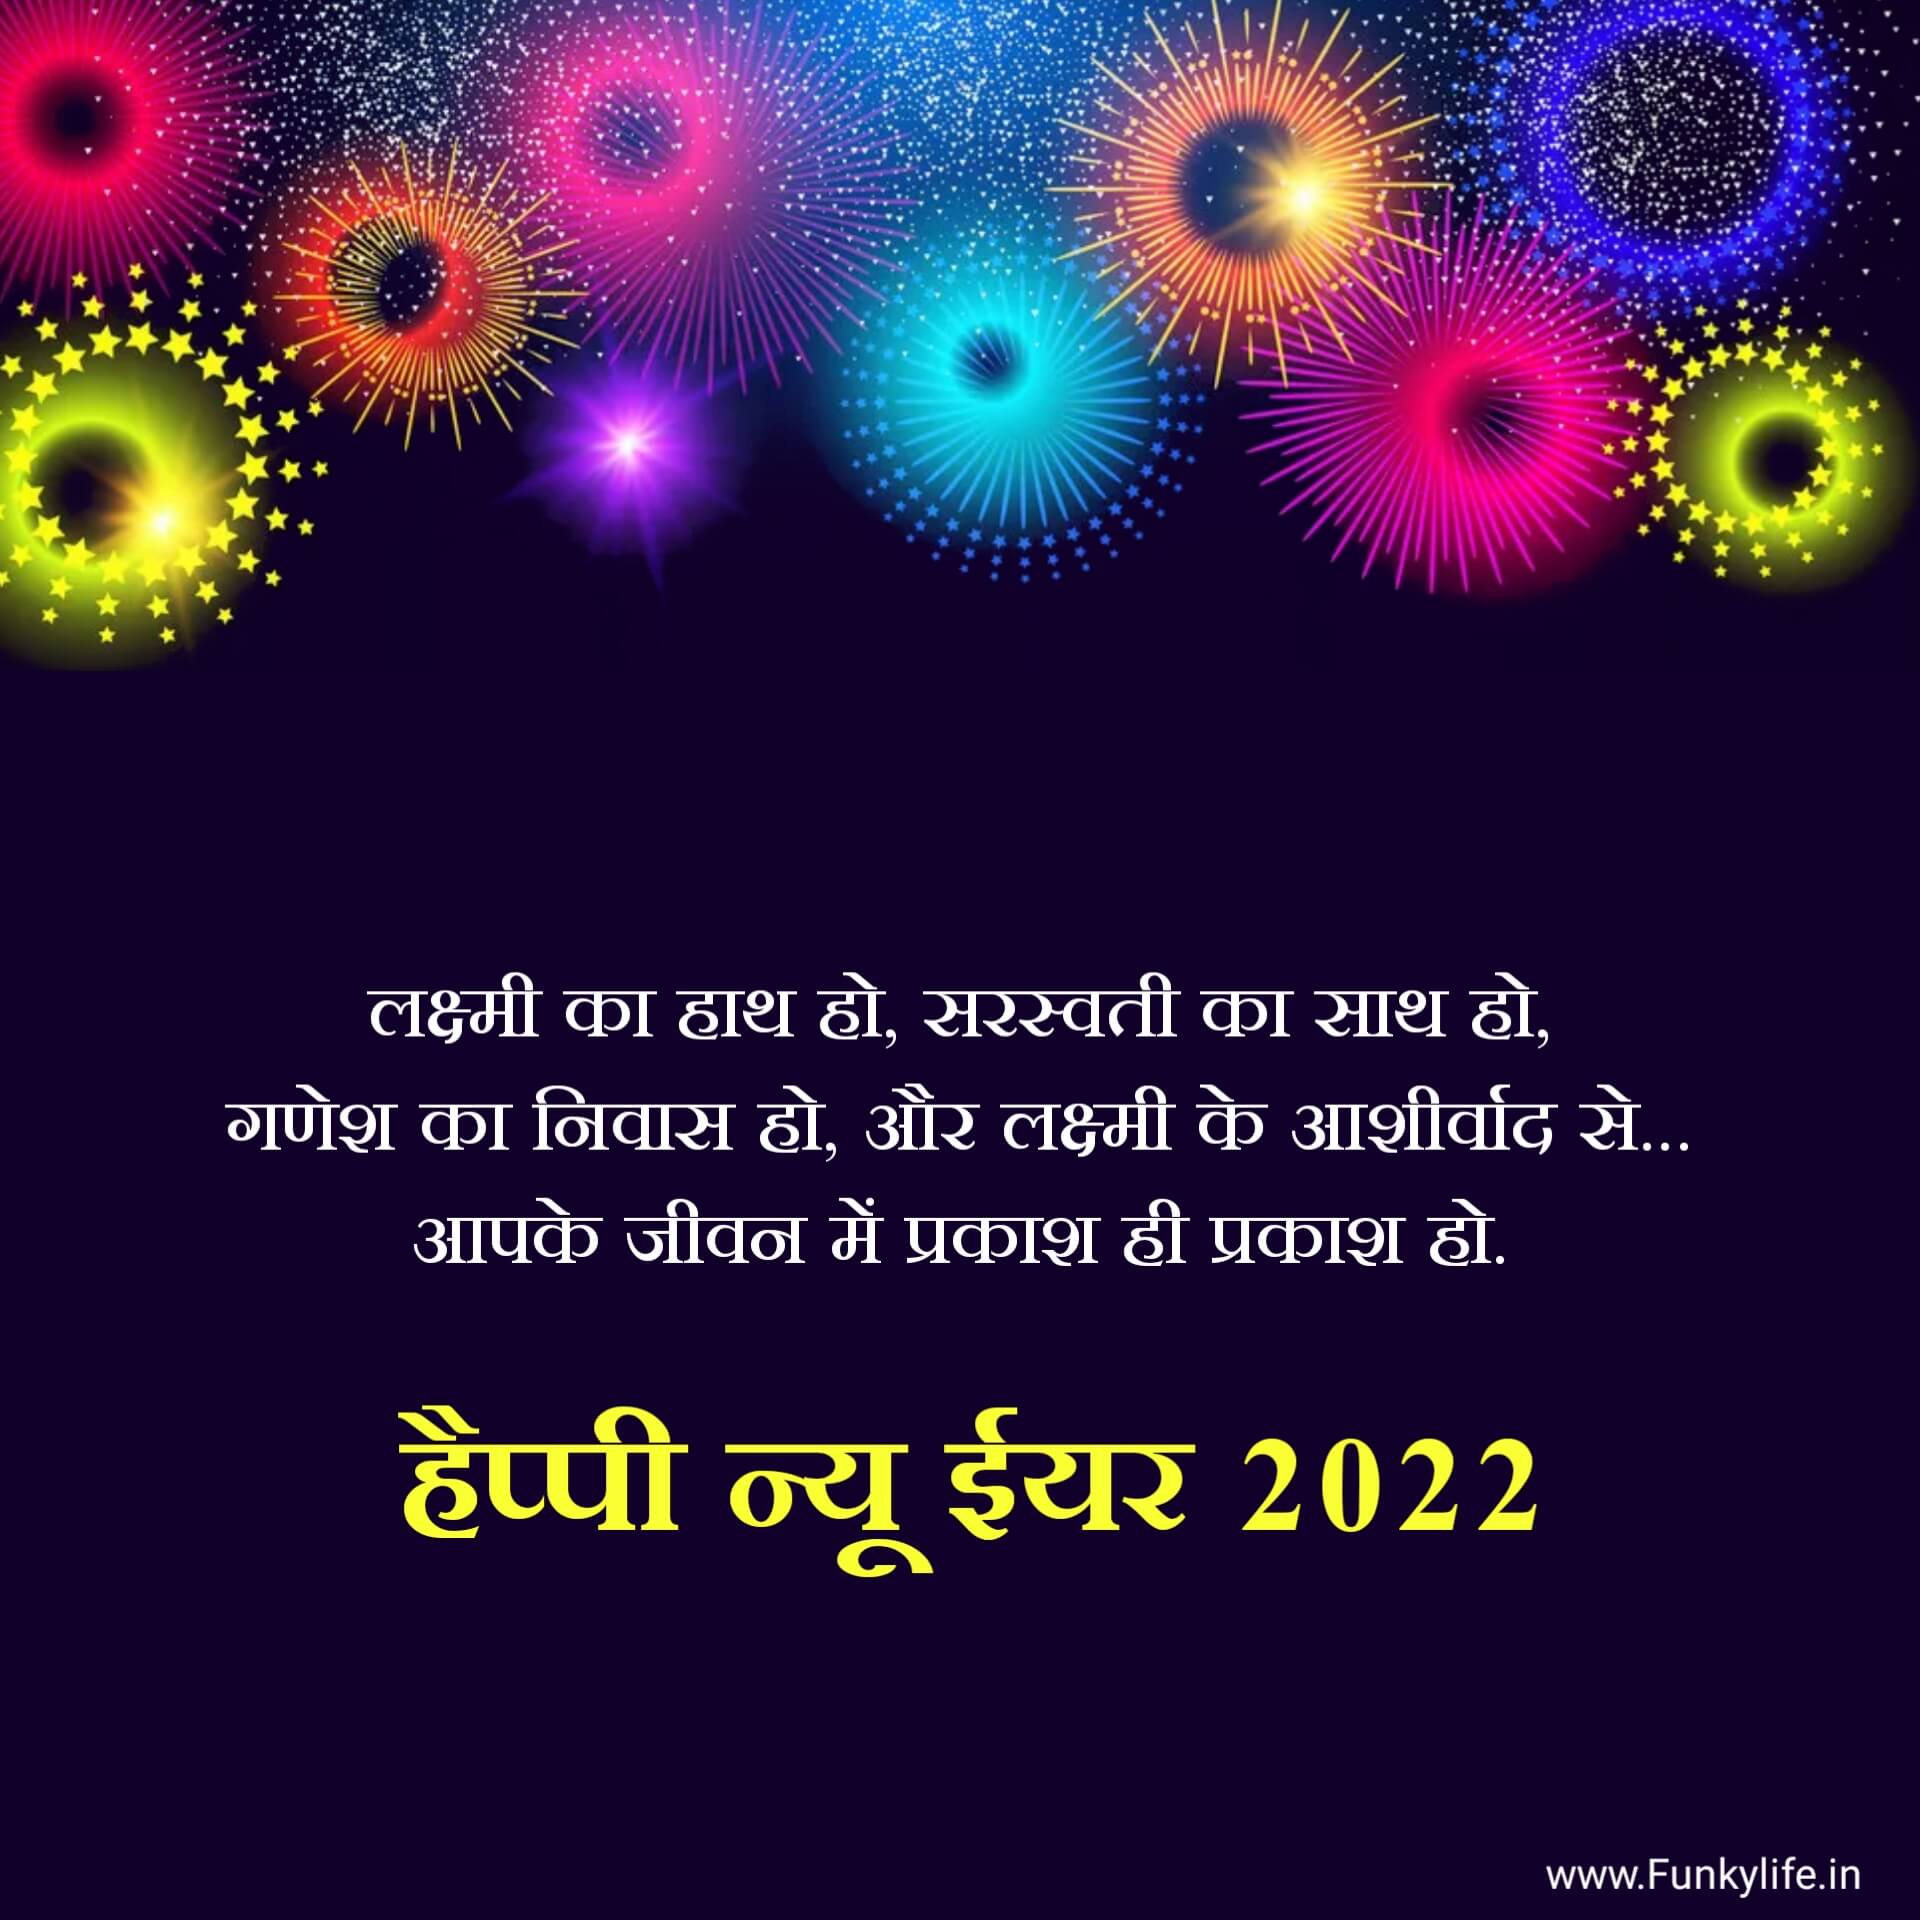 Religious Happy New Year Wishes in Hindi